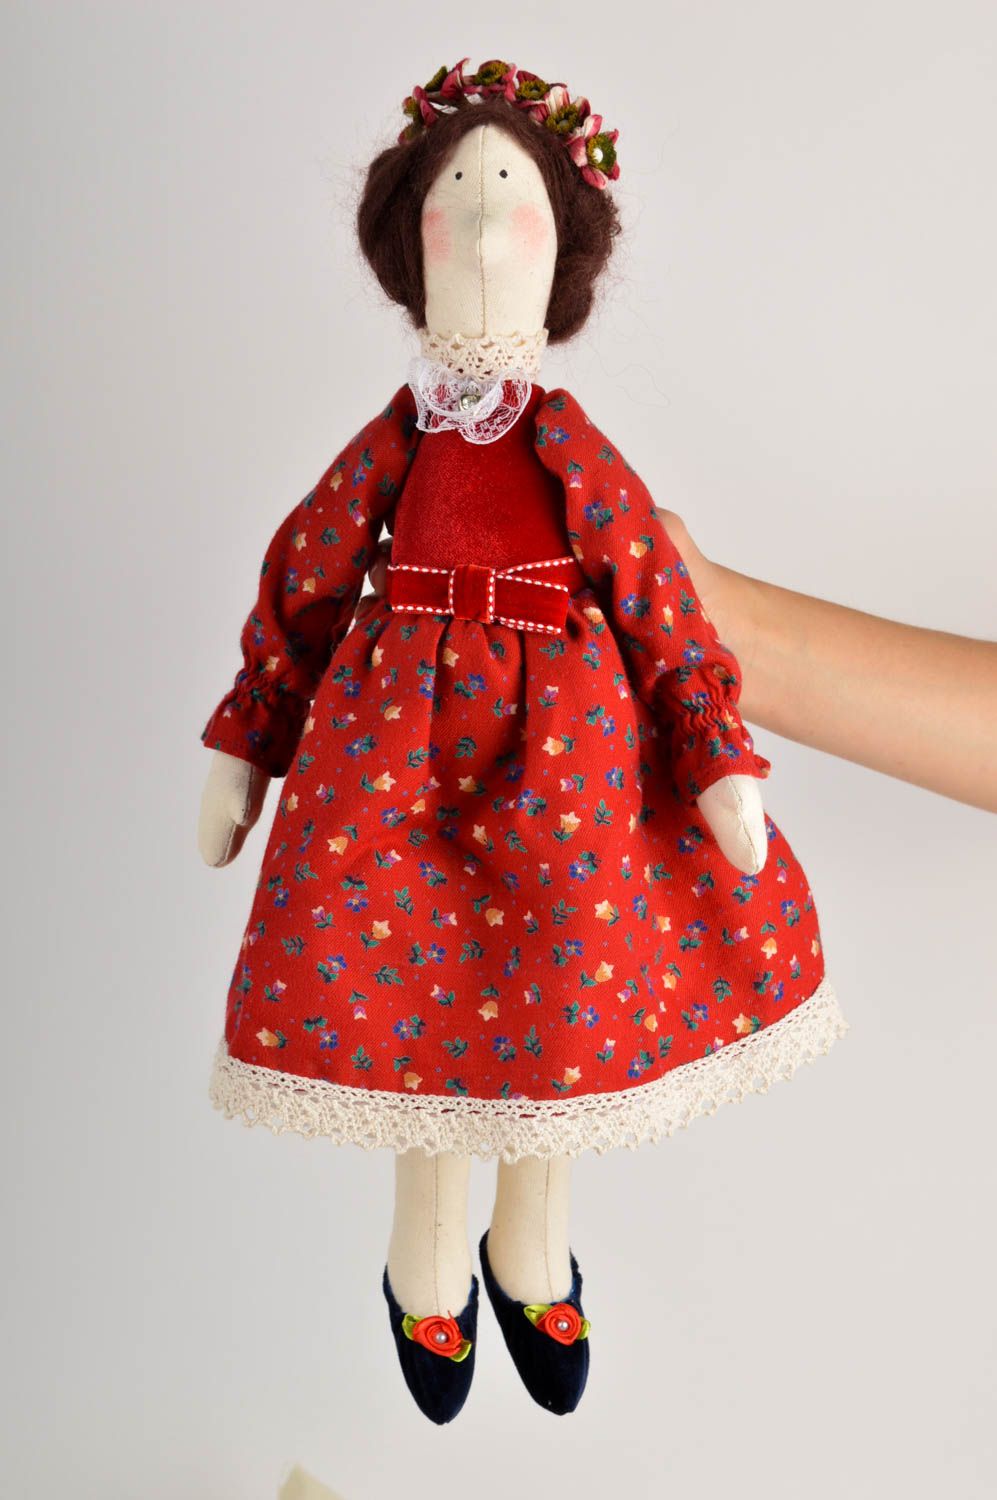 Handmade doll in red dress stuffed toy designer childrens toy decoration ideas photo 5